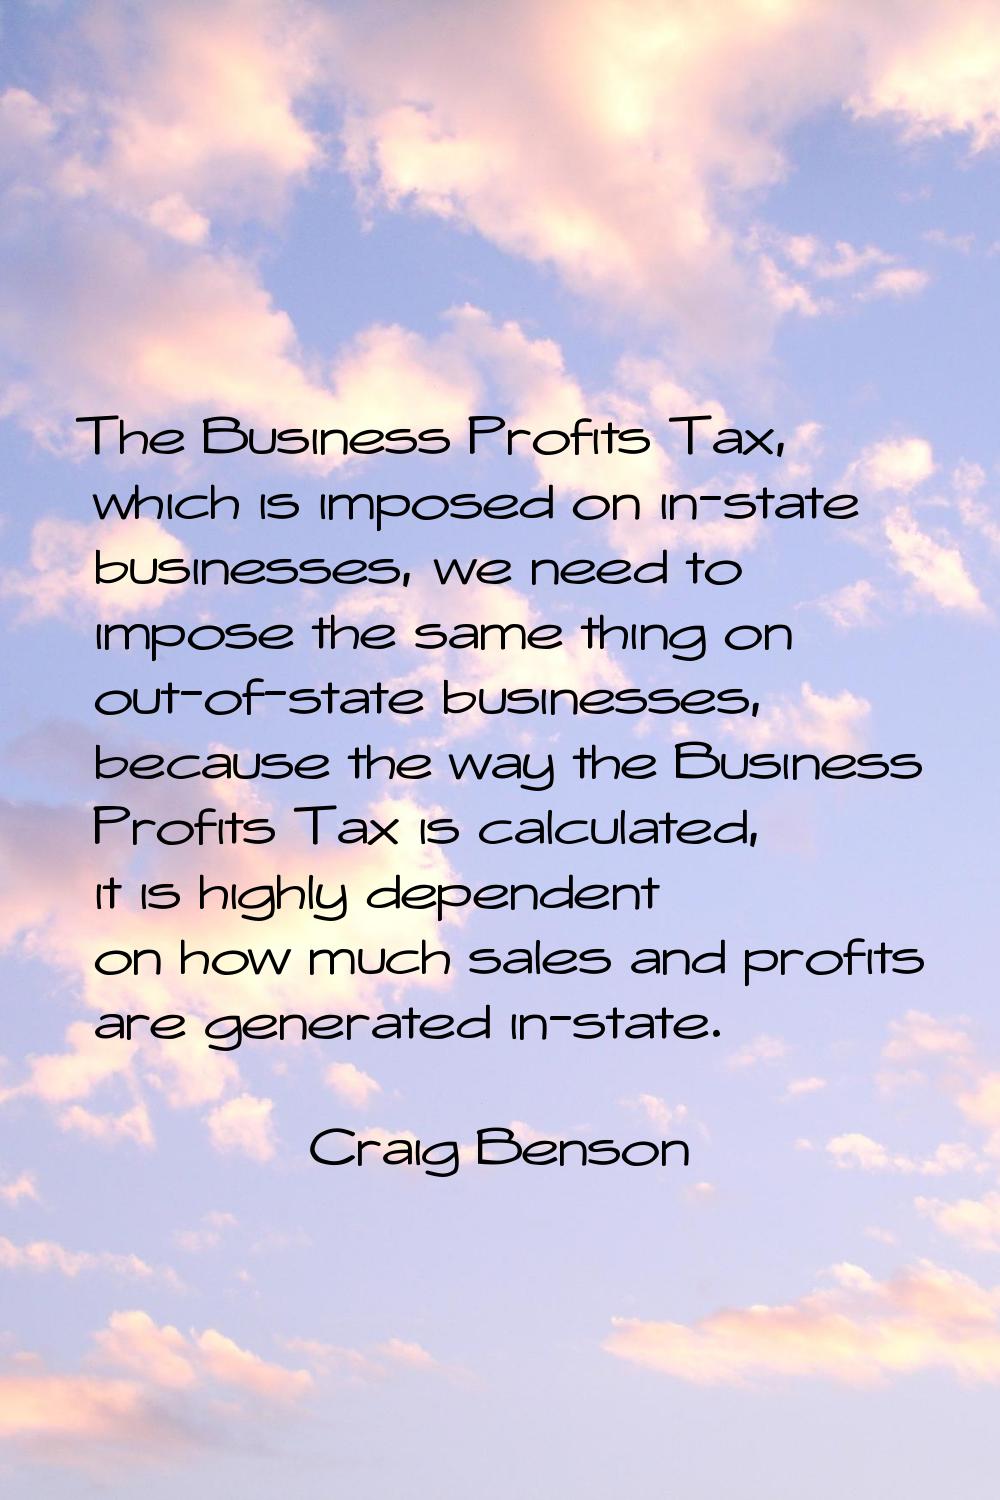 The Business Profits Tax, which is imposed on in-state businesses, we need to impose the same thing